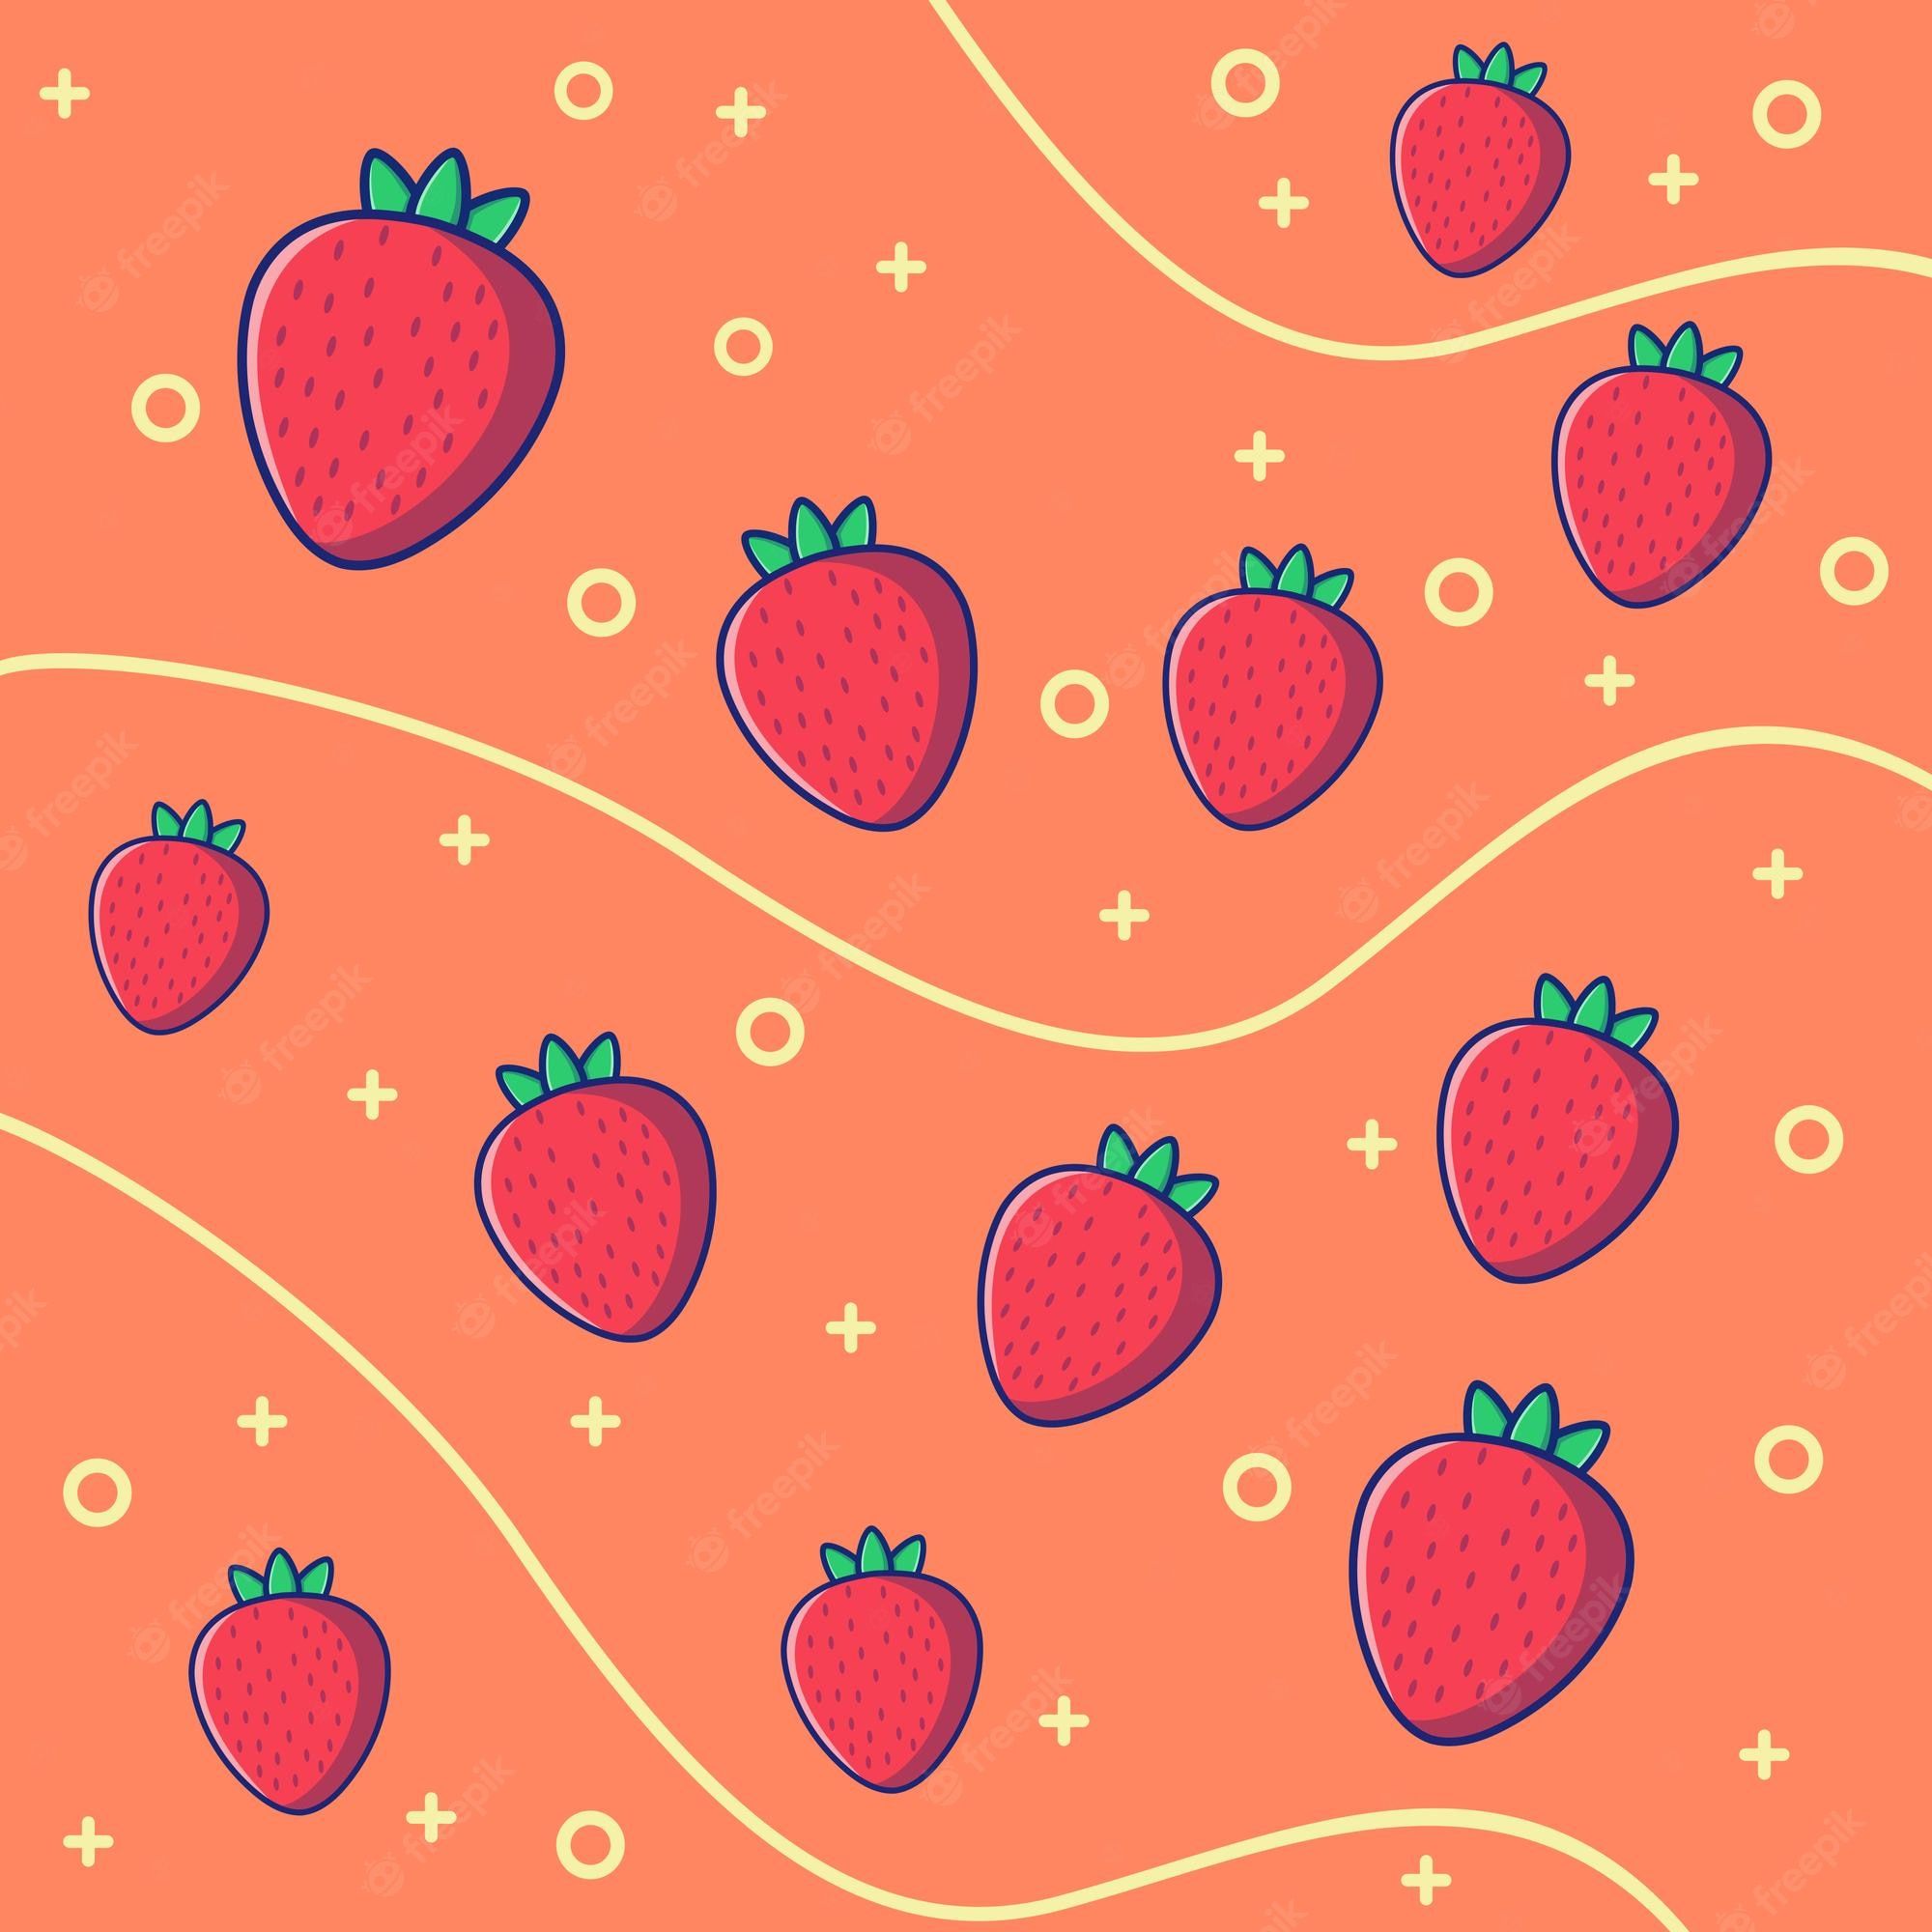 Premium Vector. Strawberry fruit pattern background and curved lines